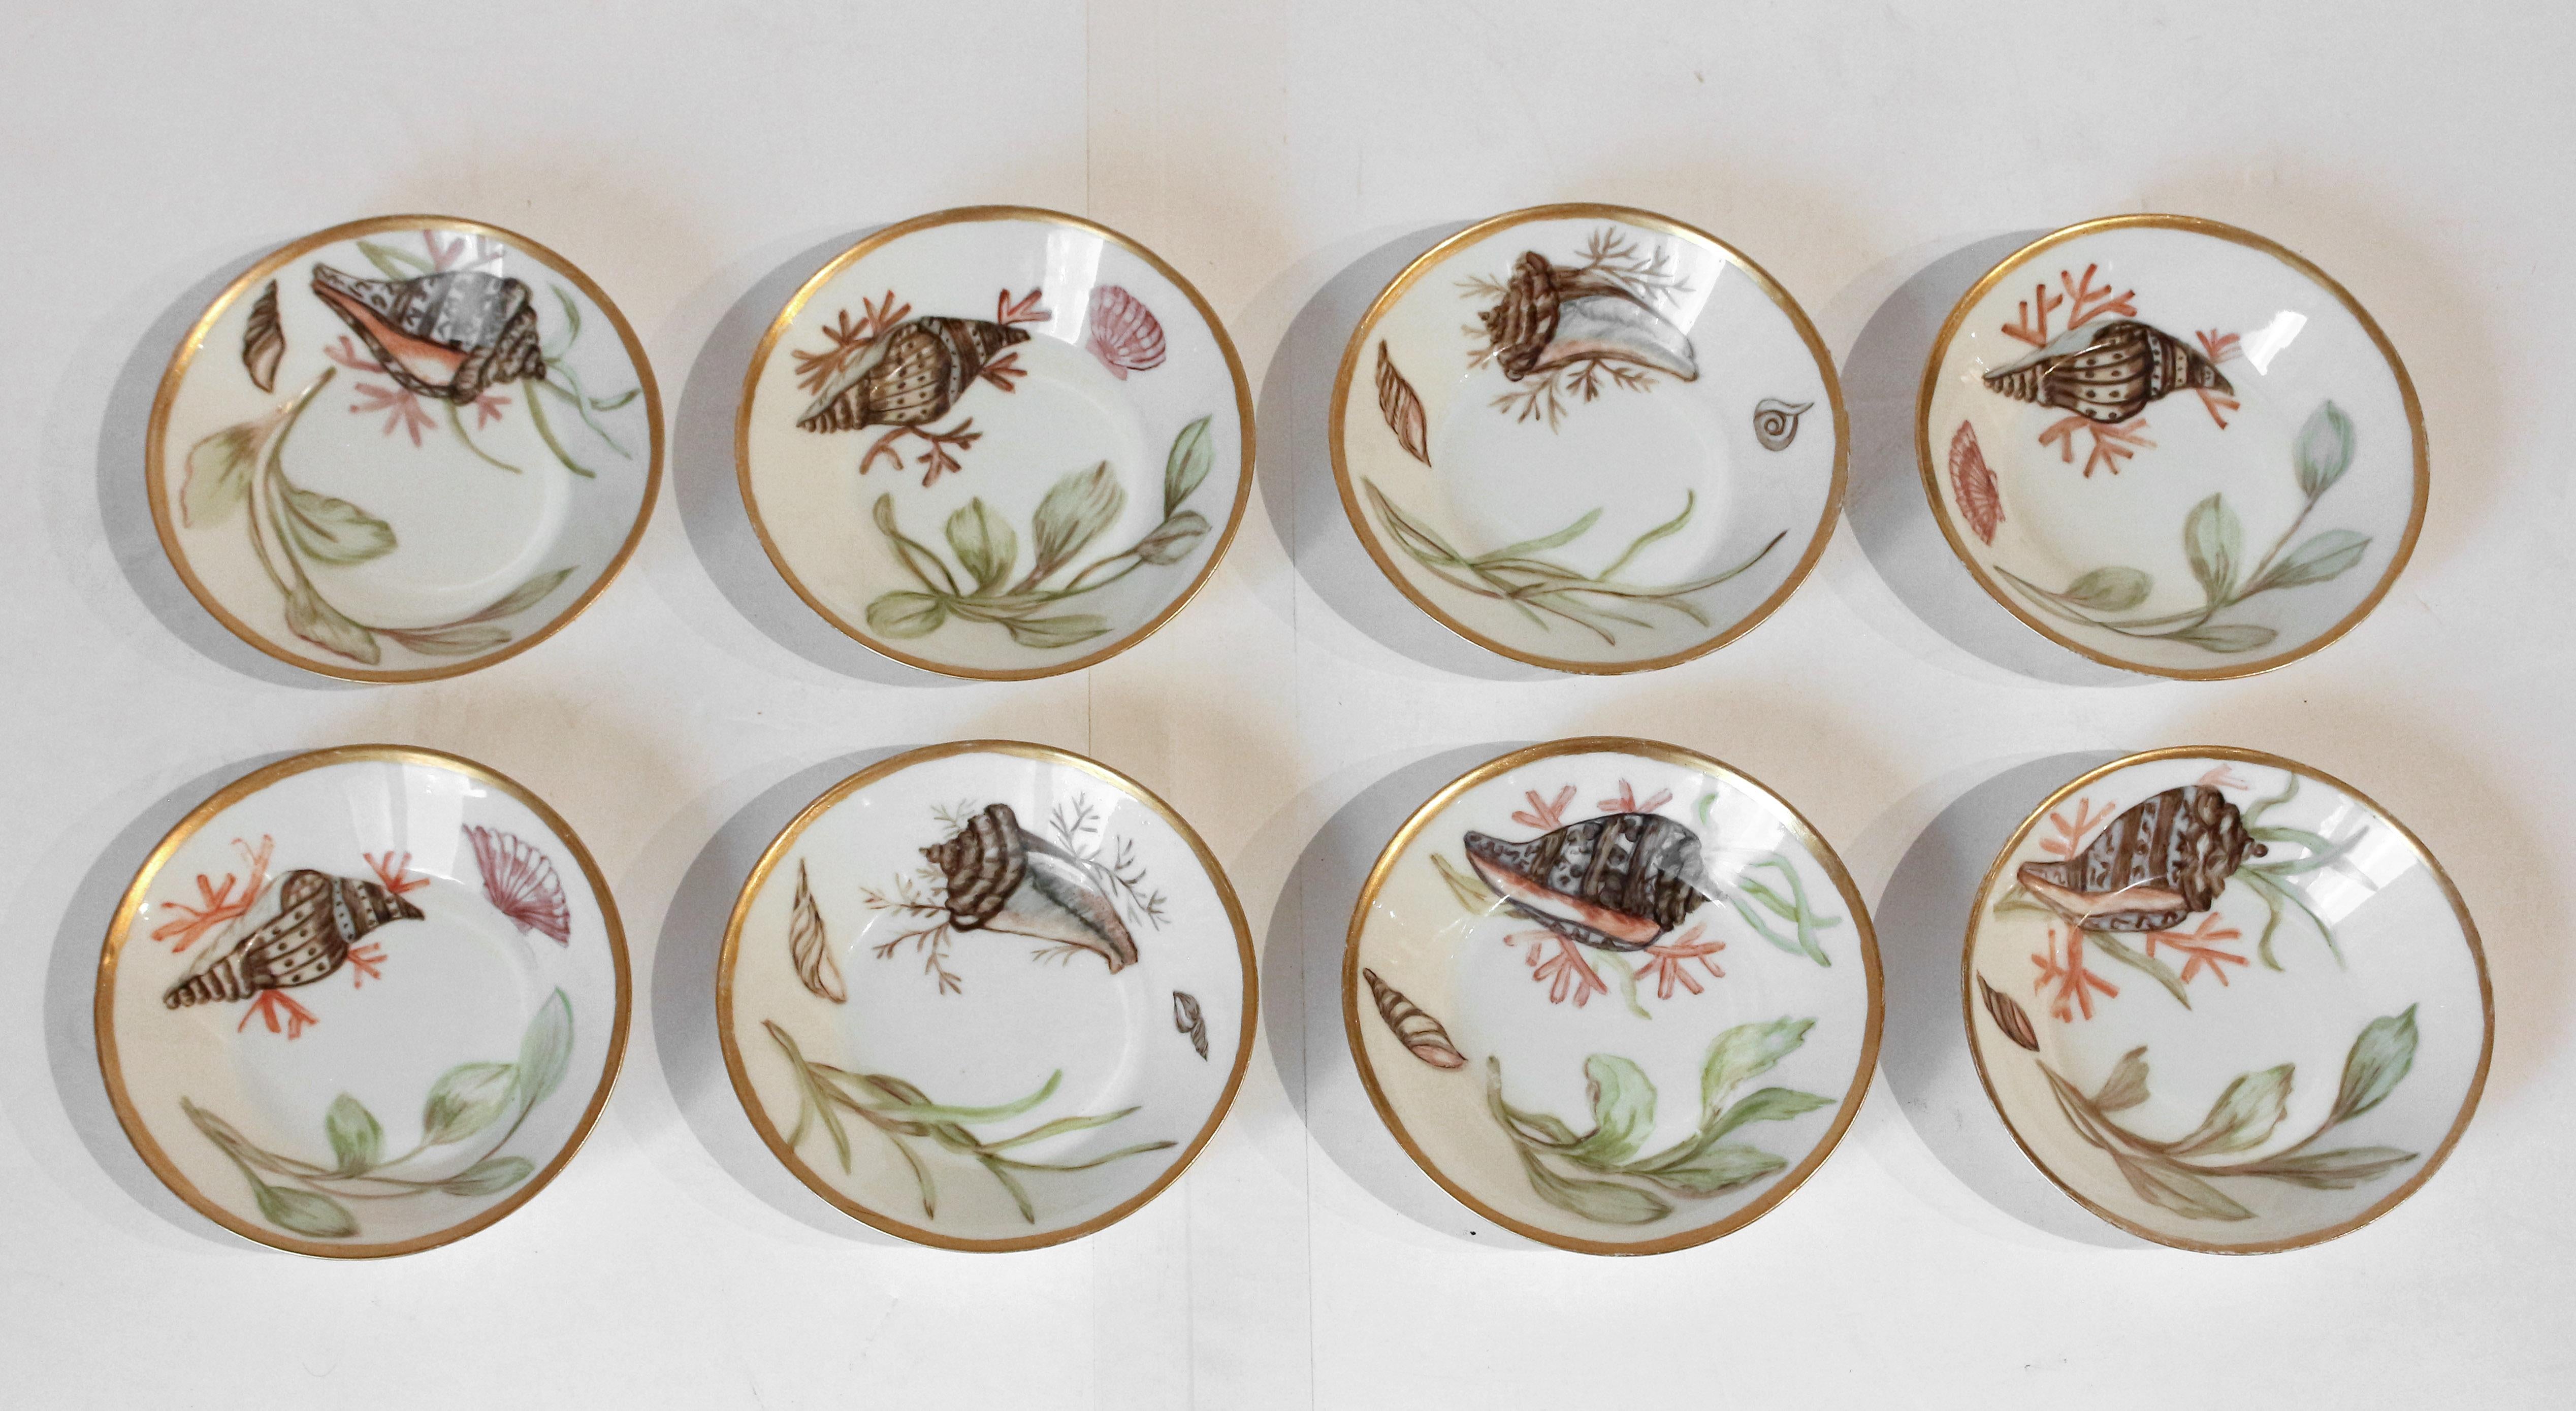 Late 19th Century Circa 1880-1900 Seashells & Seaweed Motif Fish Service by Limoges For Sale